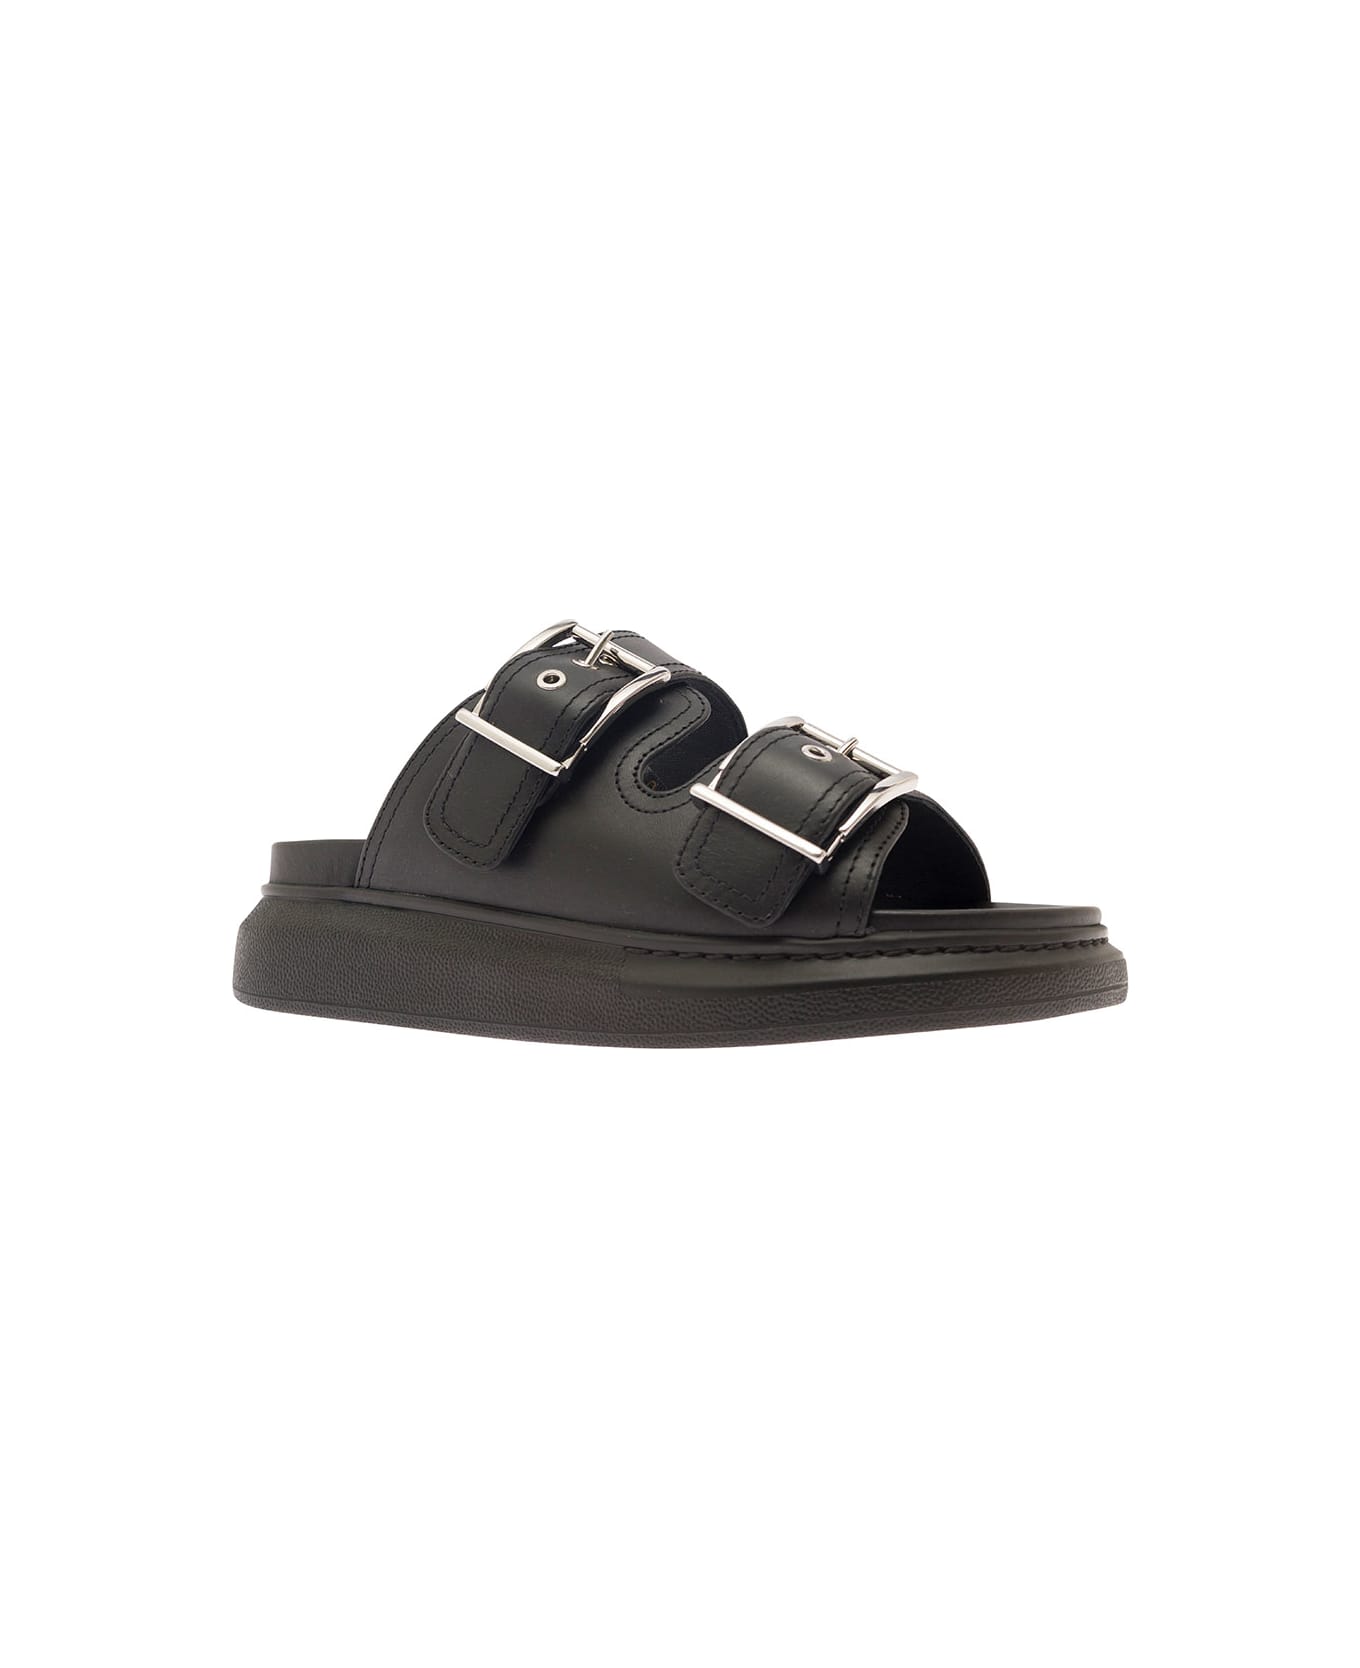 Alexander McQueen Black Sandals With Double-straps In Leather Woman - Black サンダル